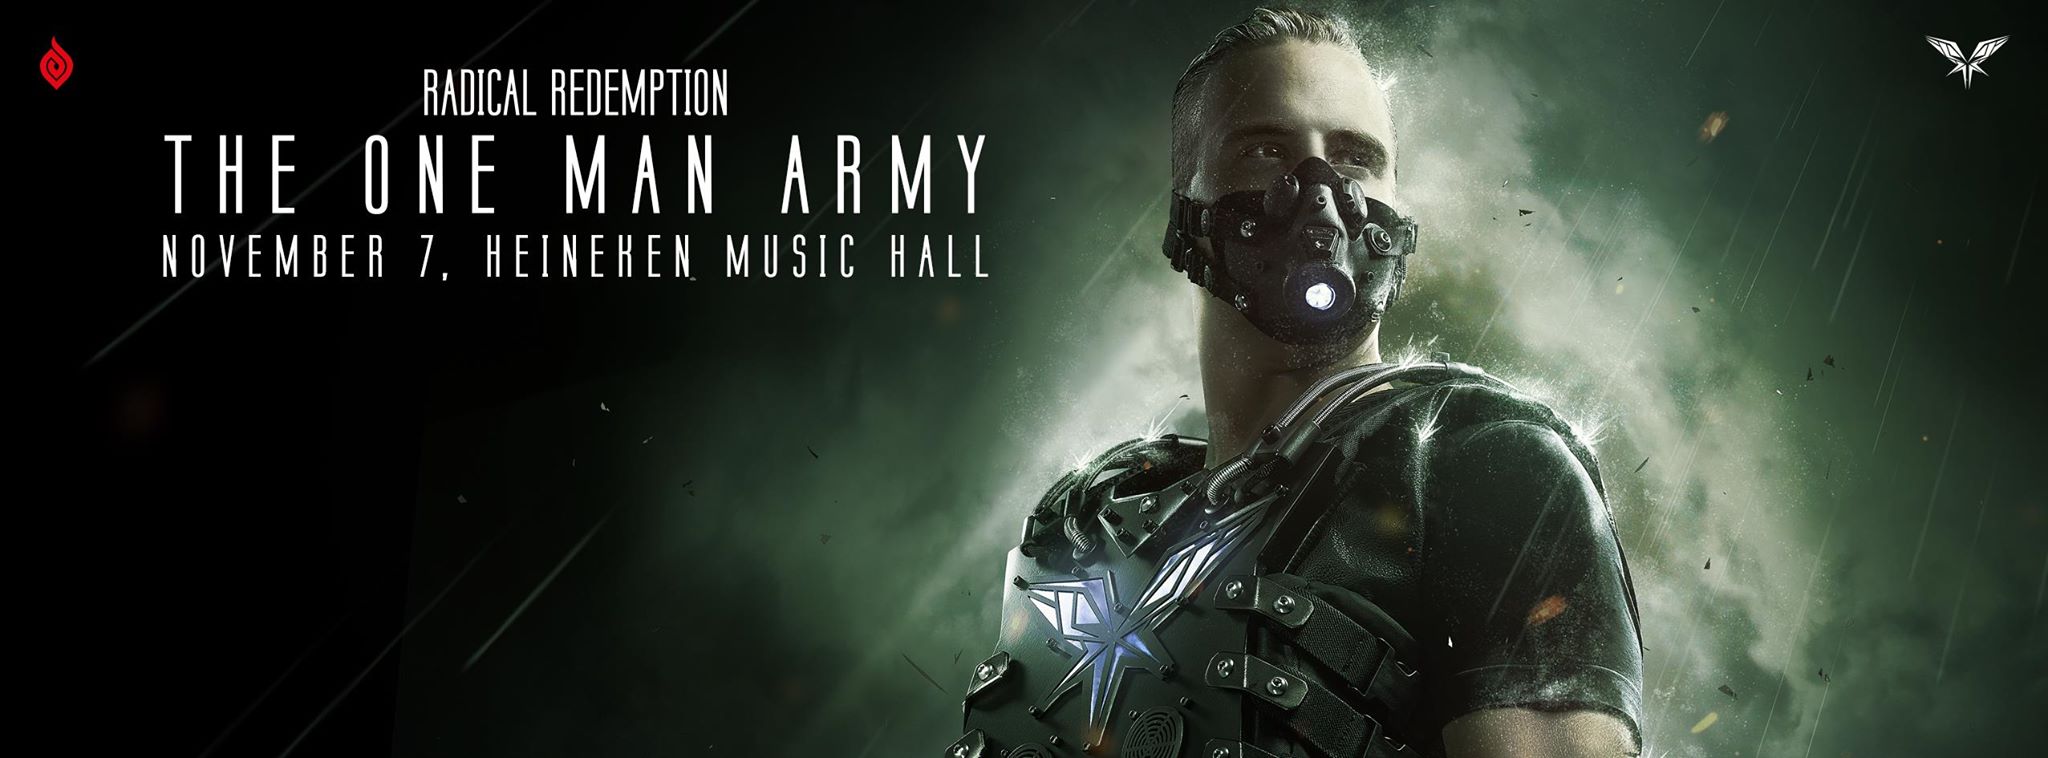 Radical Redemption S The One Man Army Album Previews Hard News